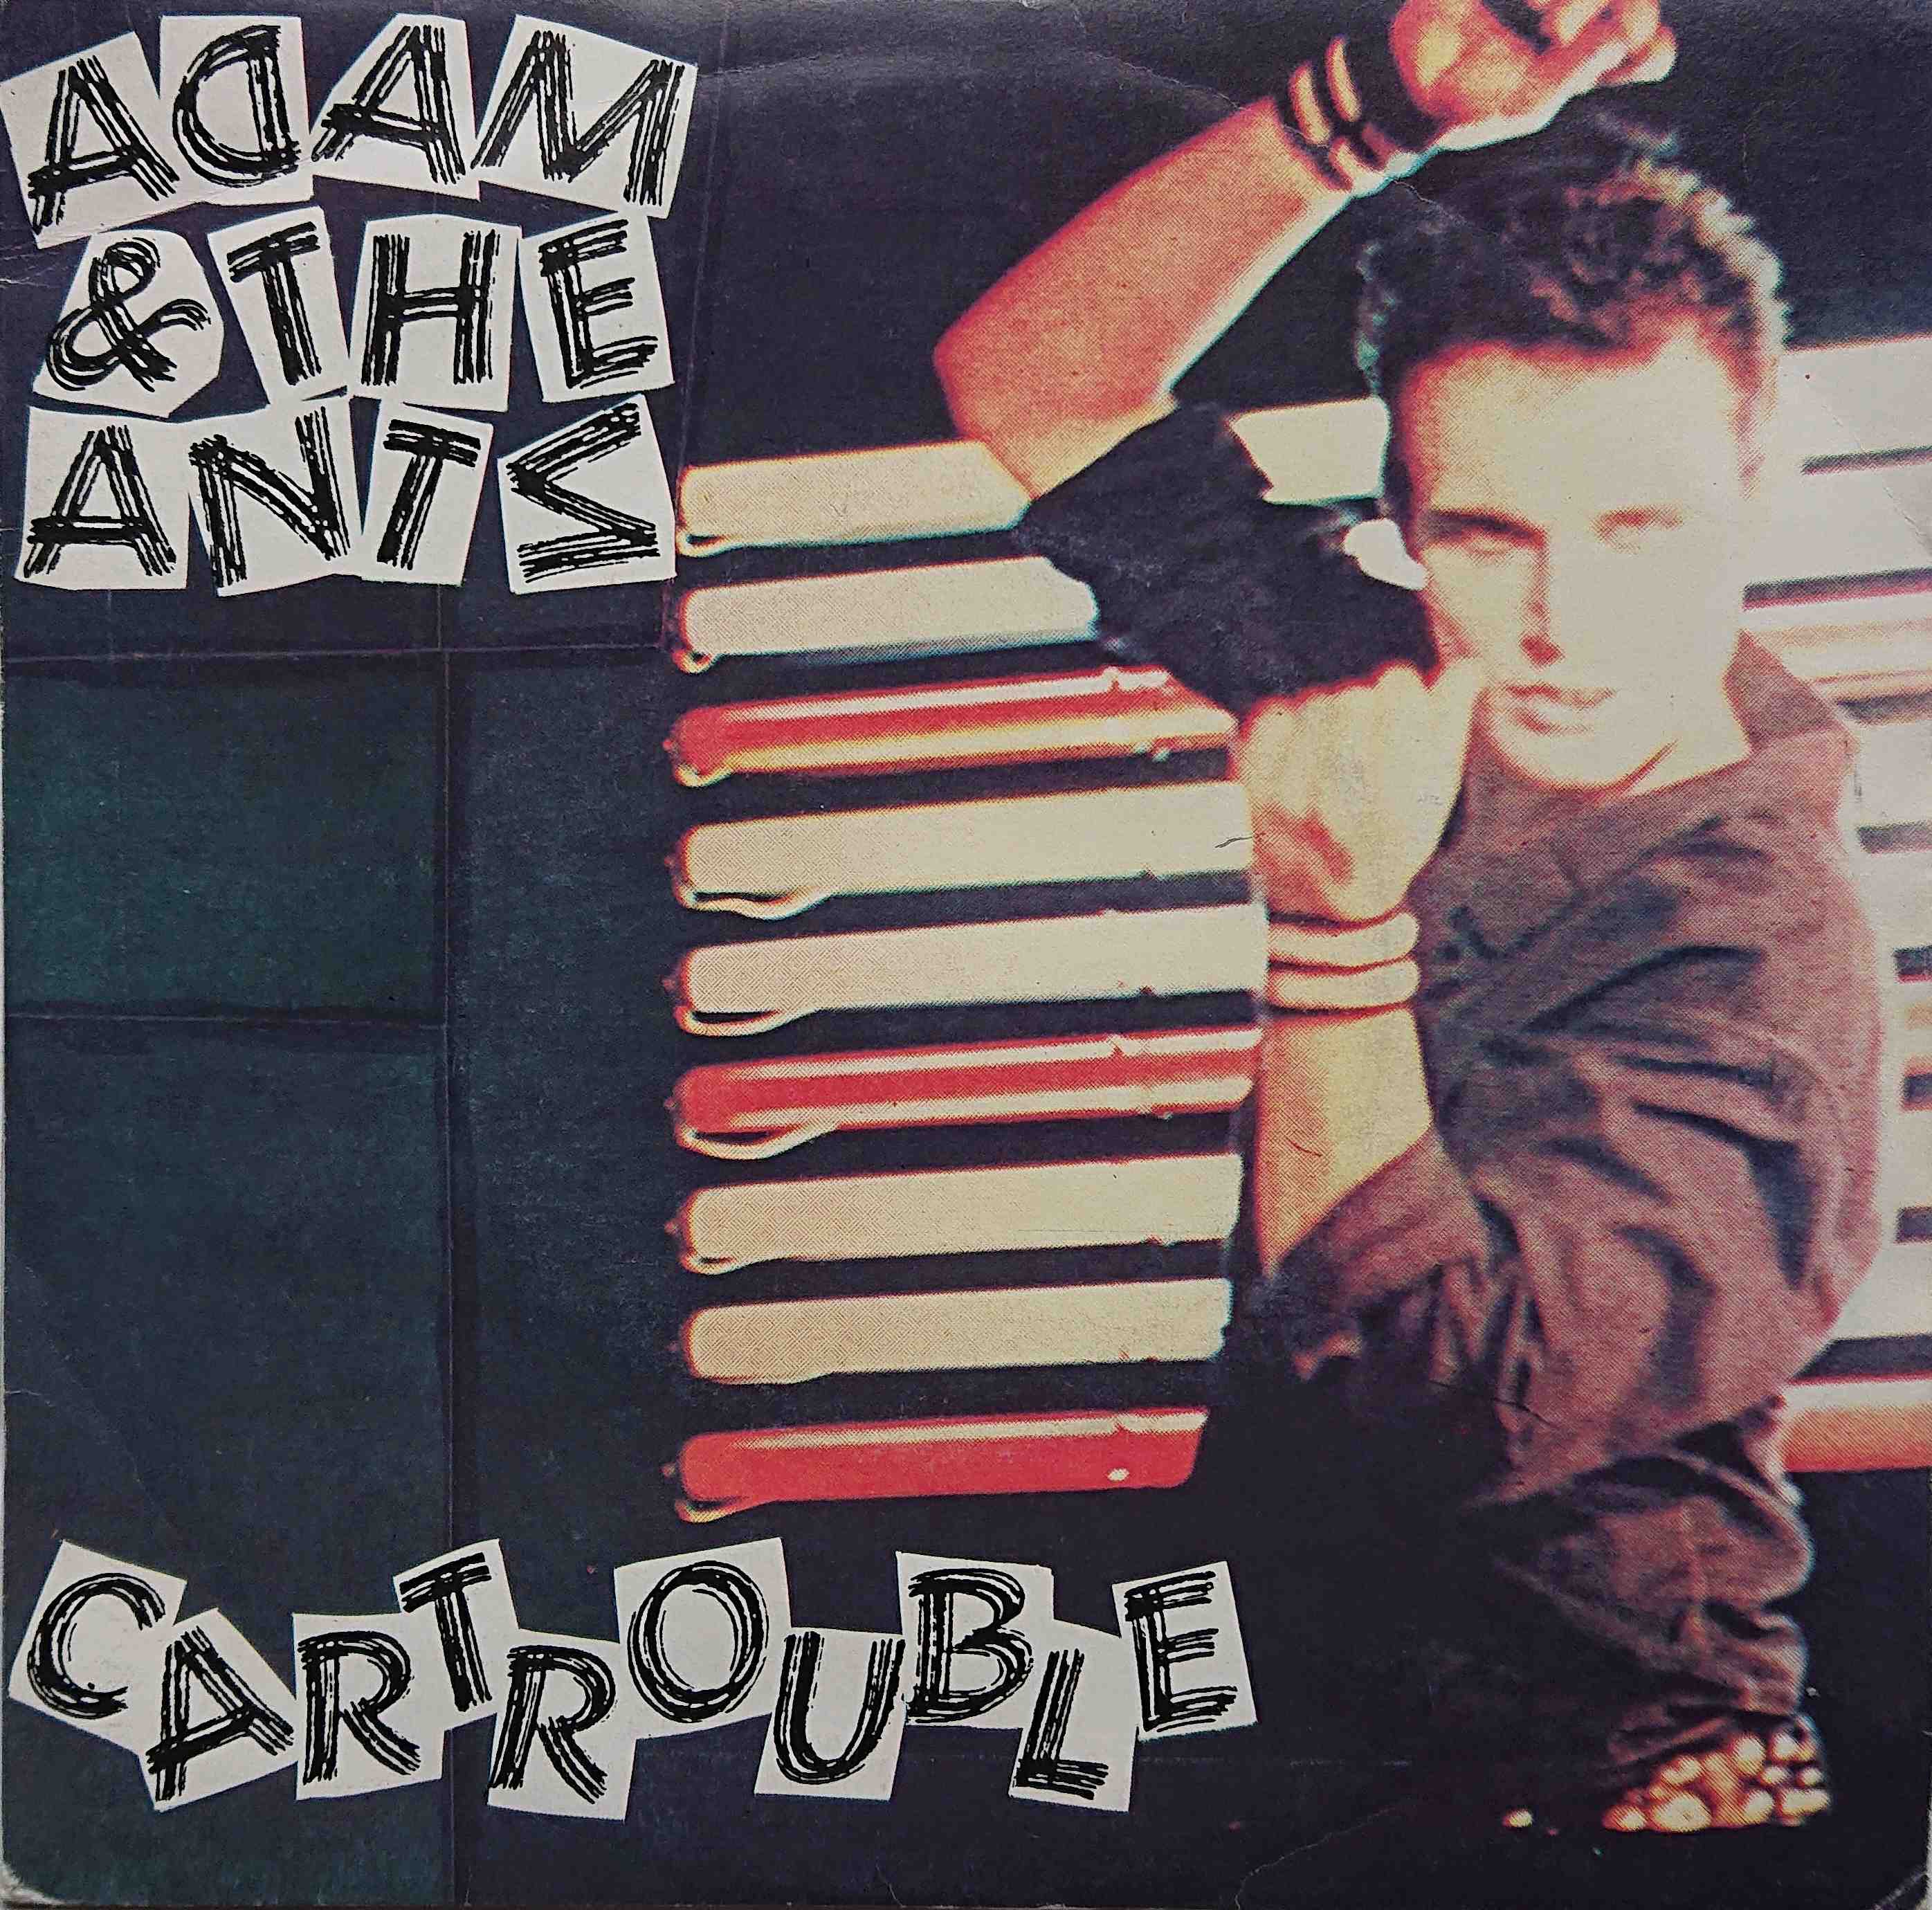 Picture of Car trouble by artist Adam and the Ants 